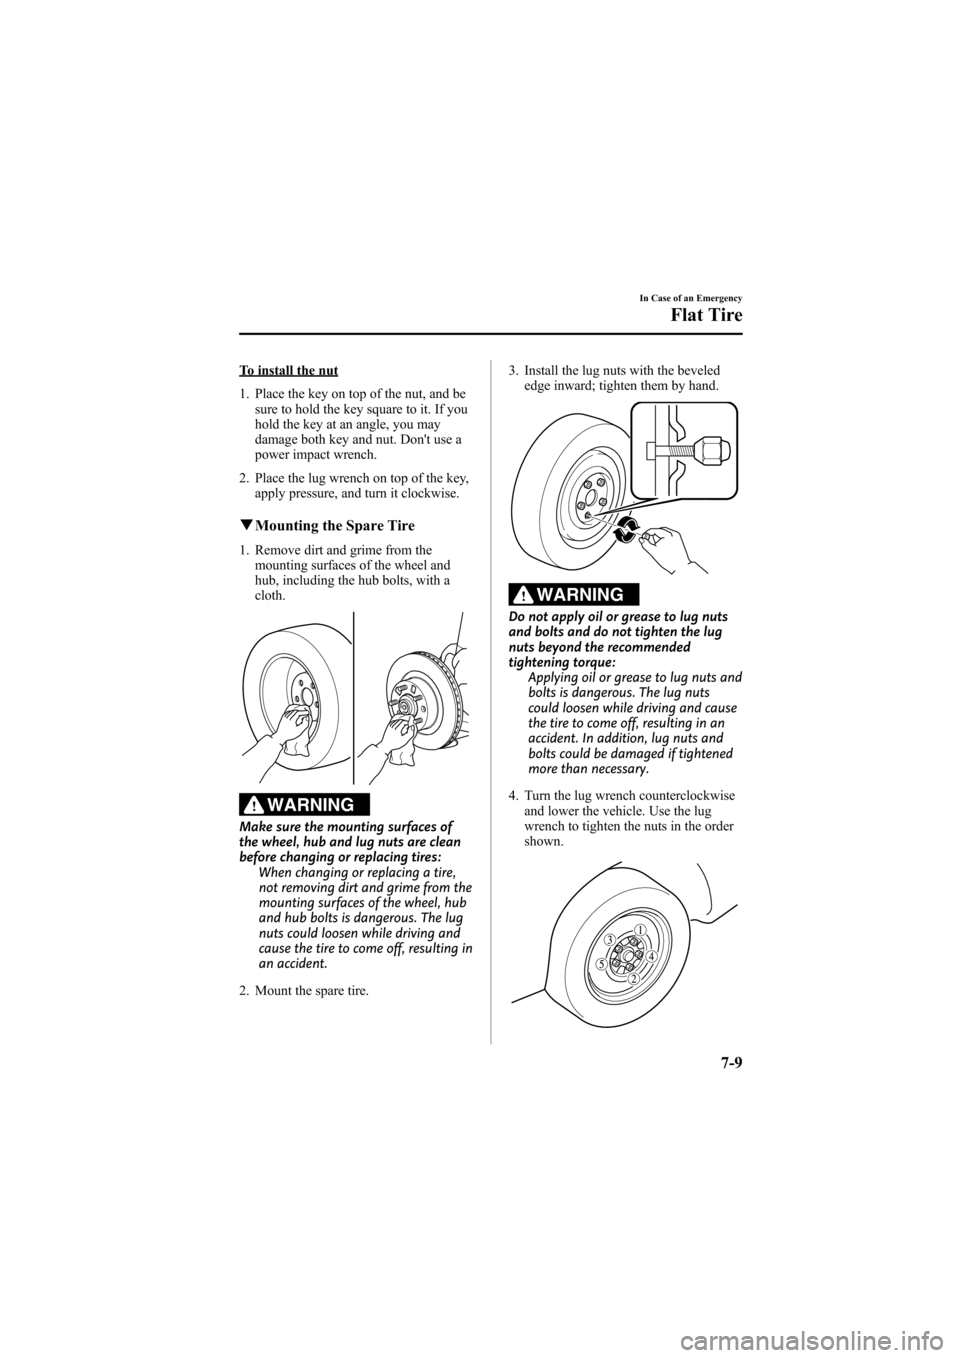 MAZDA MODEL 6 2009  Owners Manual (in English) Black plate (333,1)
To install the nut
1. Place the key on top of the nut, and besure to hold the key square to it. If you
hold the key at an angle, you may
damage both key and nut. Dont use a
power 